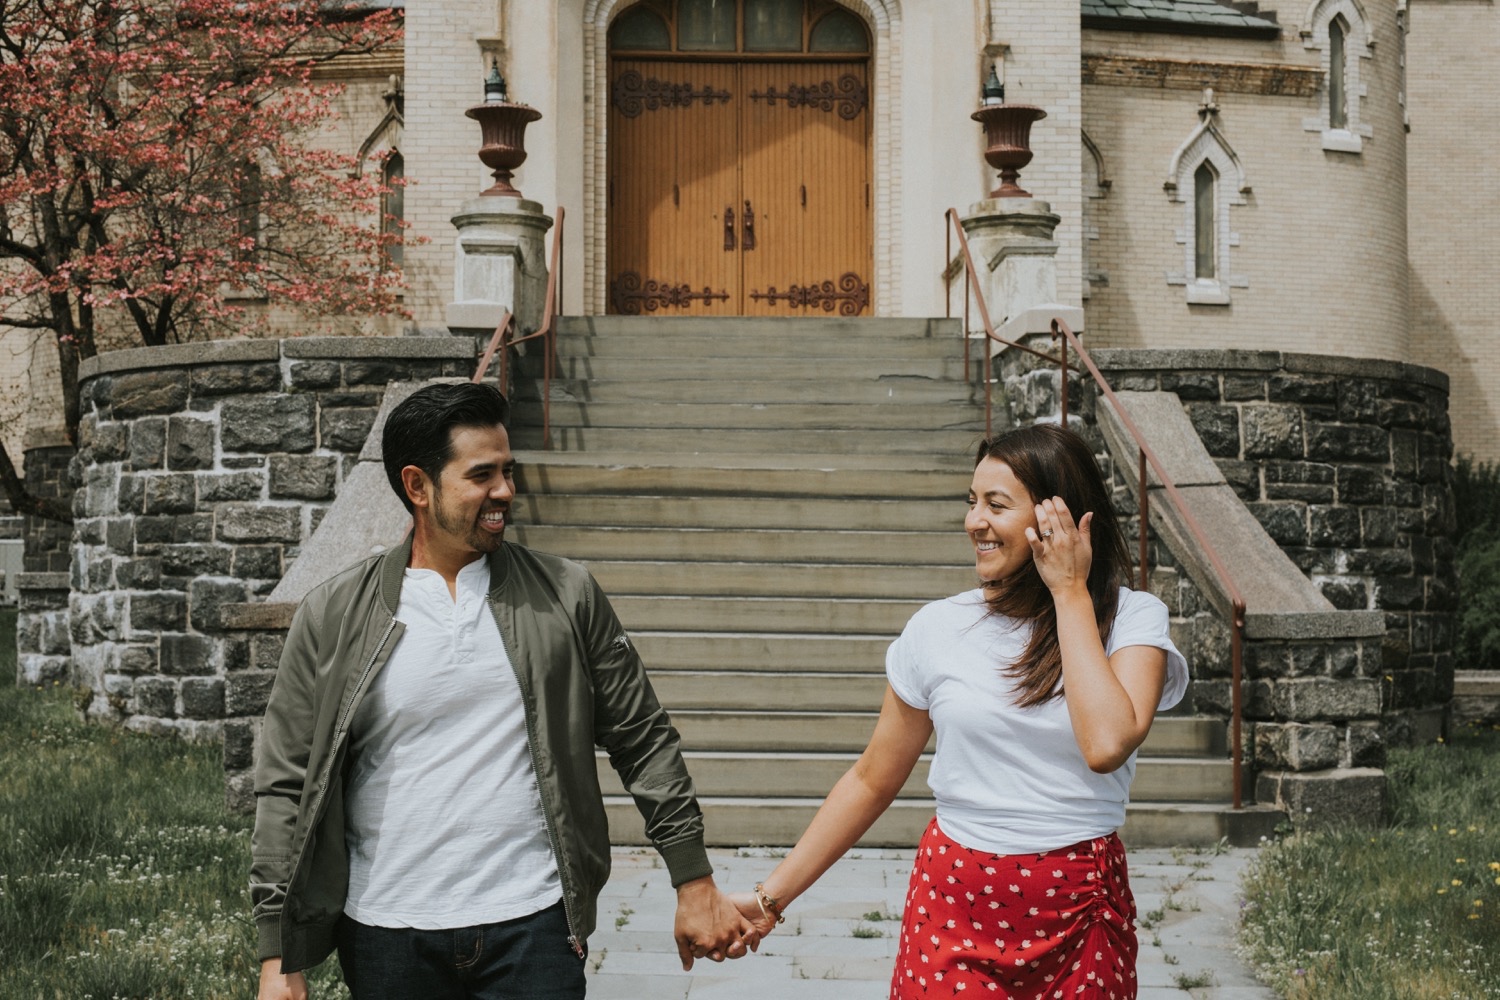 Hudson Valley Wedding Photographer, Hudson Valley Engagement Photographer, Port Chester Engagement Session, Capitol Theater, Lyons Park Engagement Session